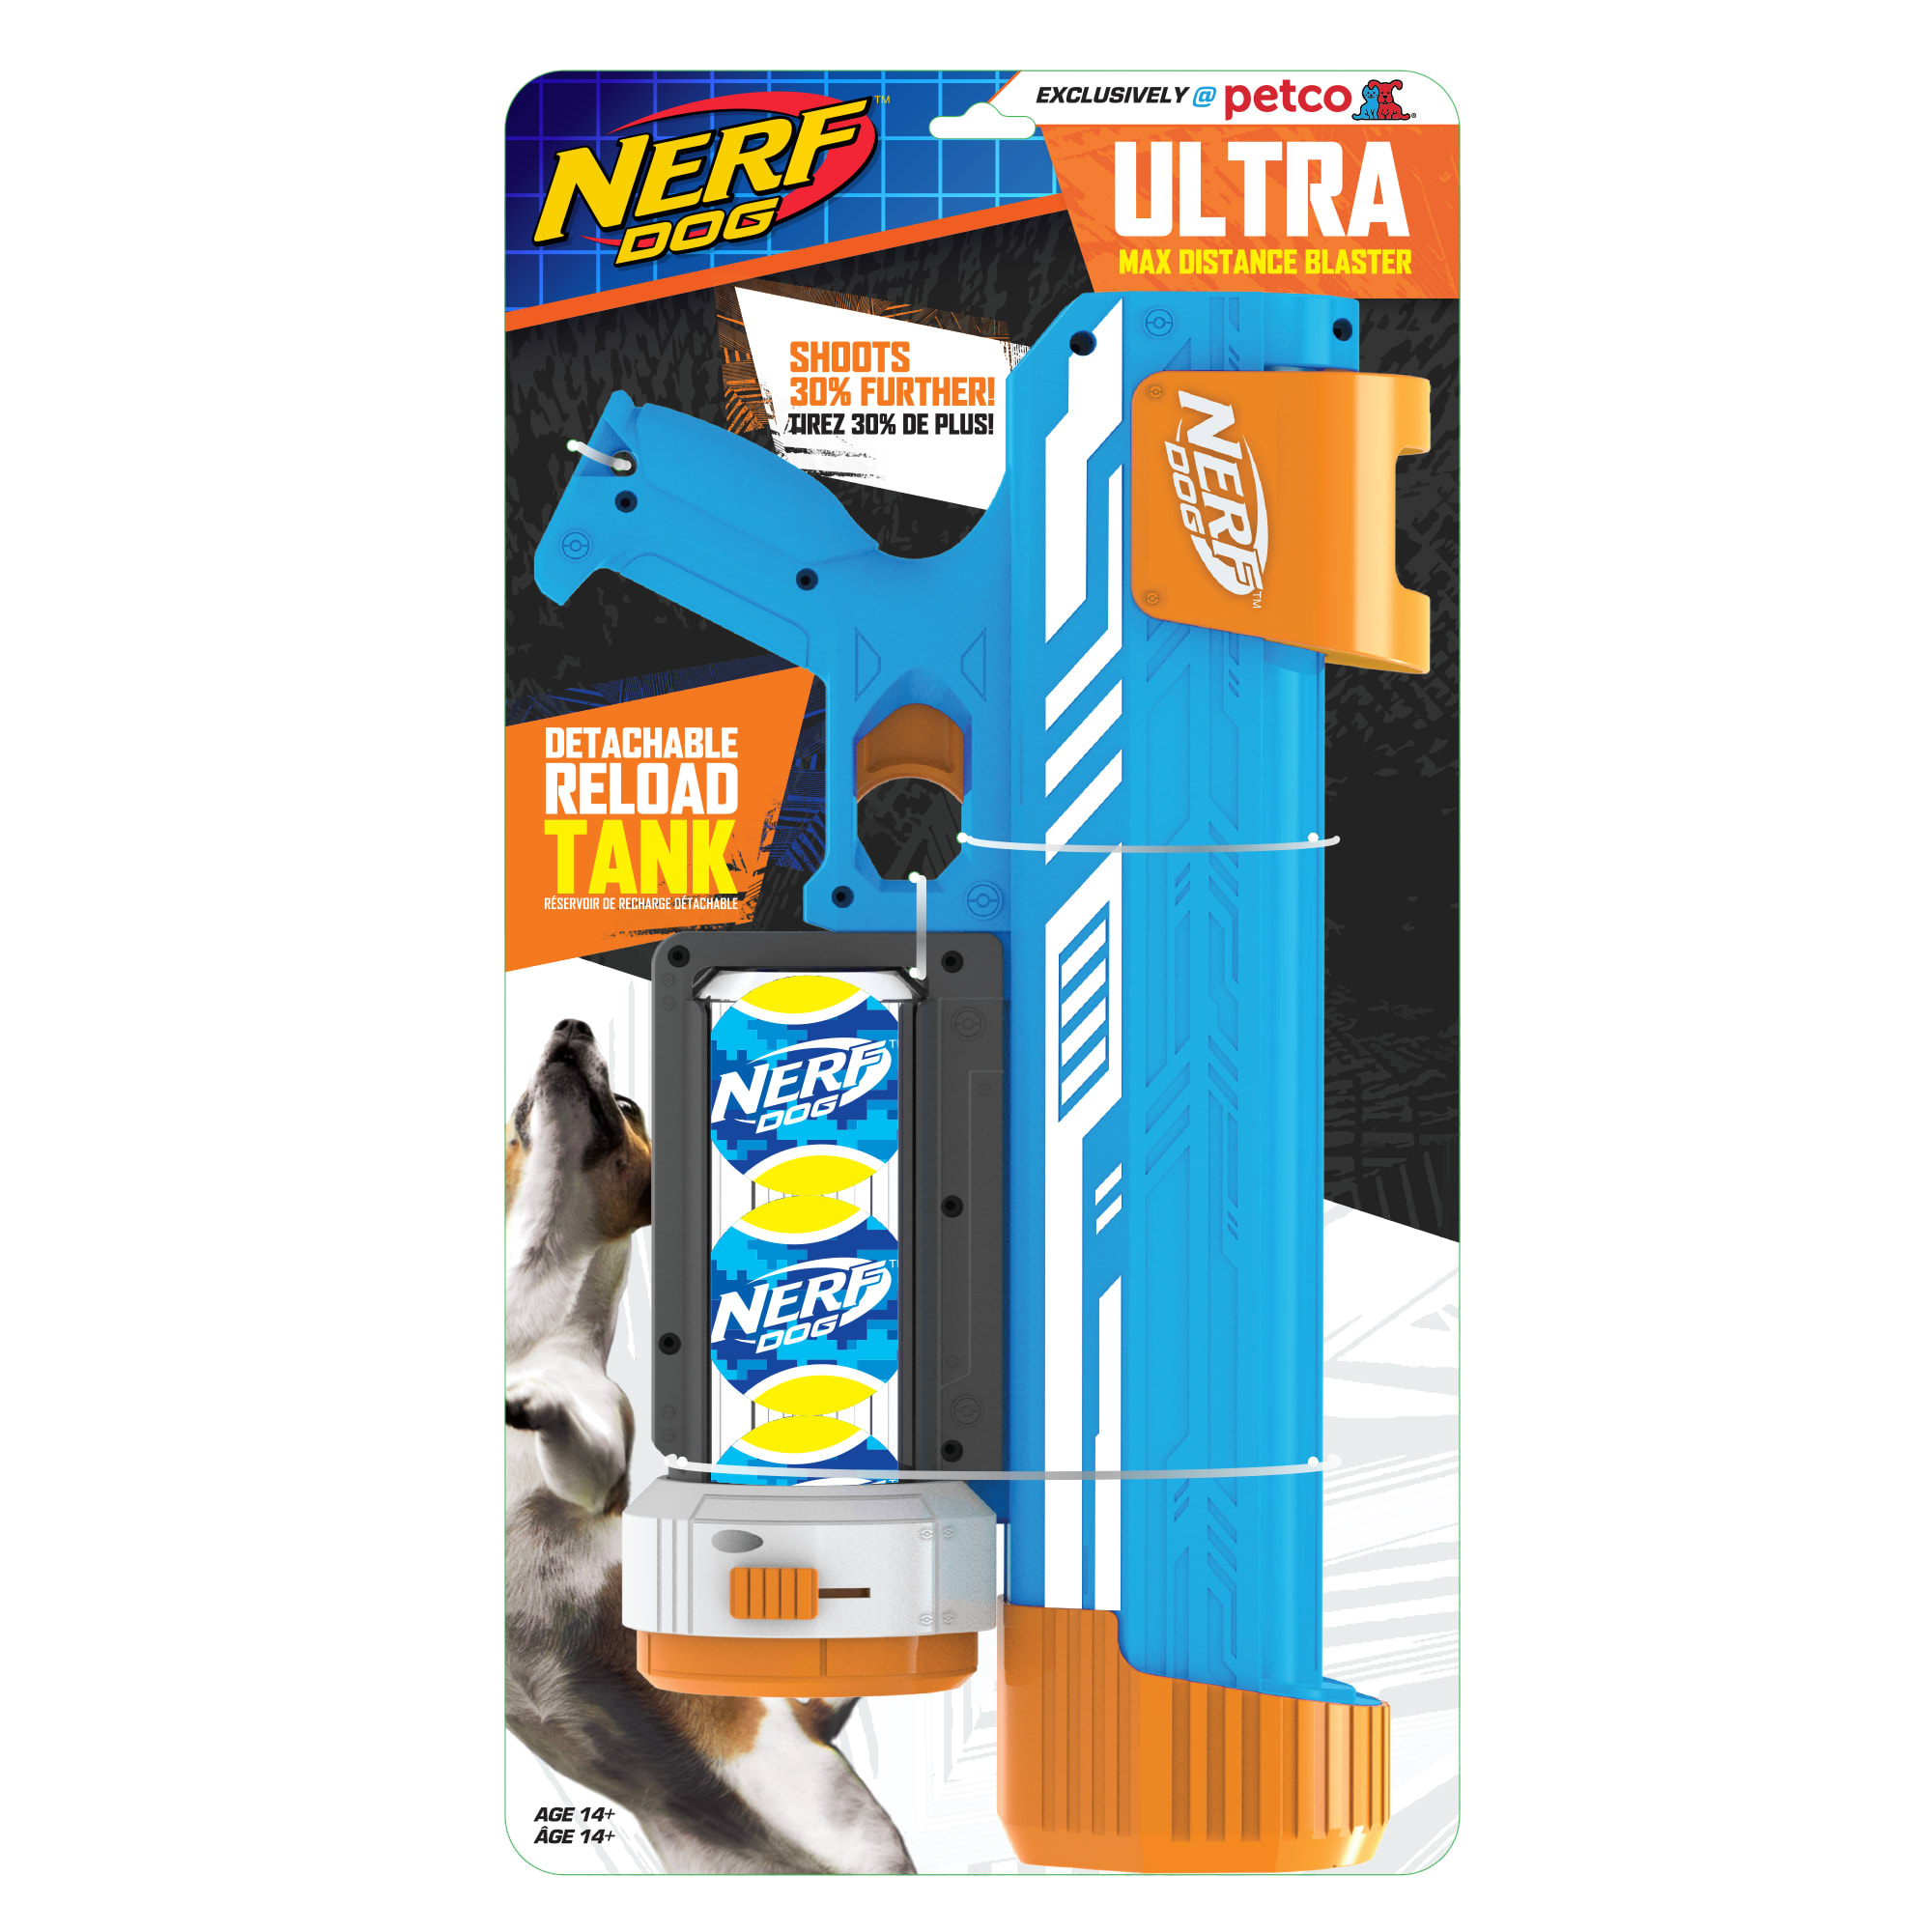 Nerf Ultra Blaster with White Stripes and Canister Dog Toy, Medium